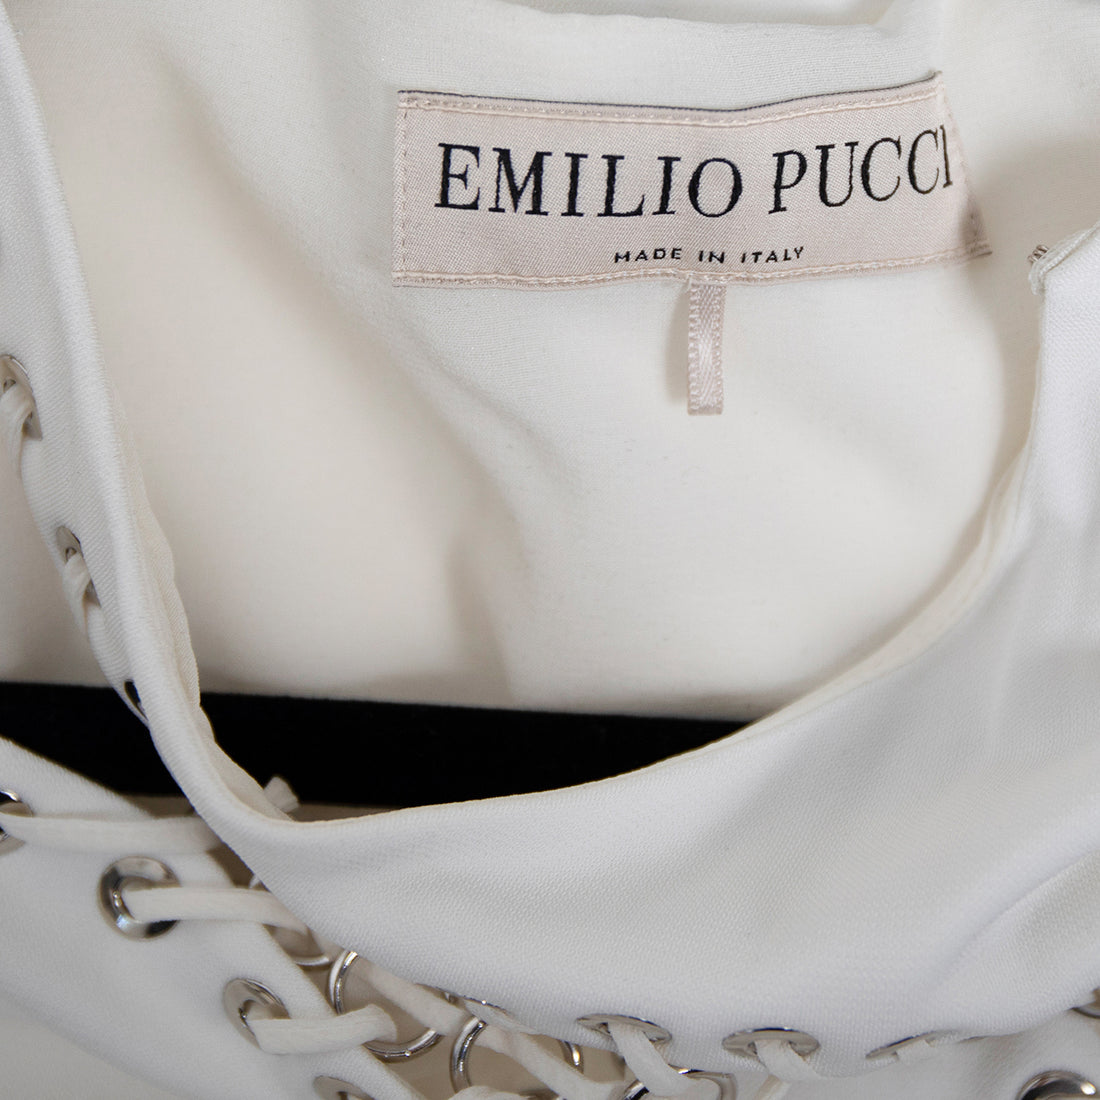 Emilio Pucci evening dress with cut-out details on the shoulder